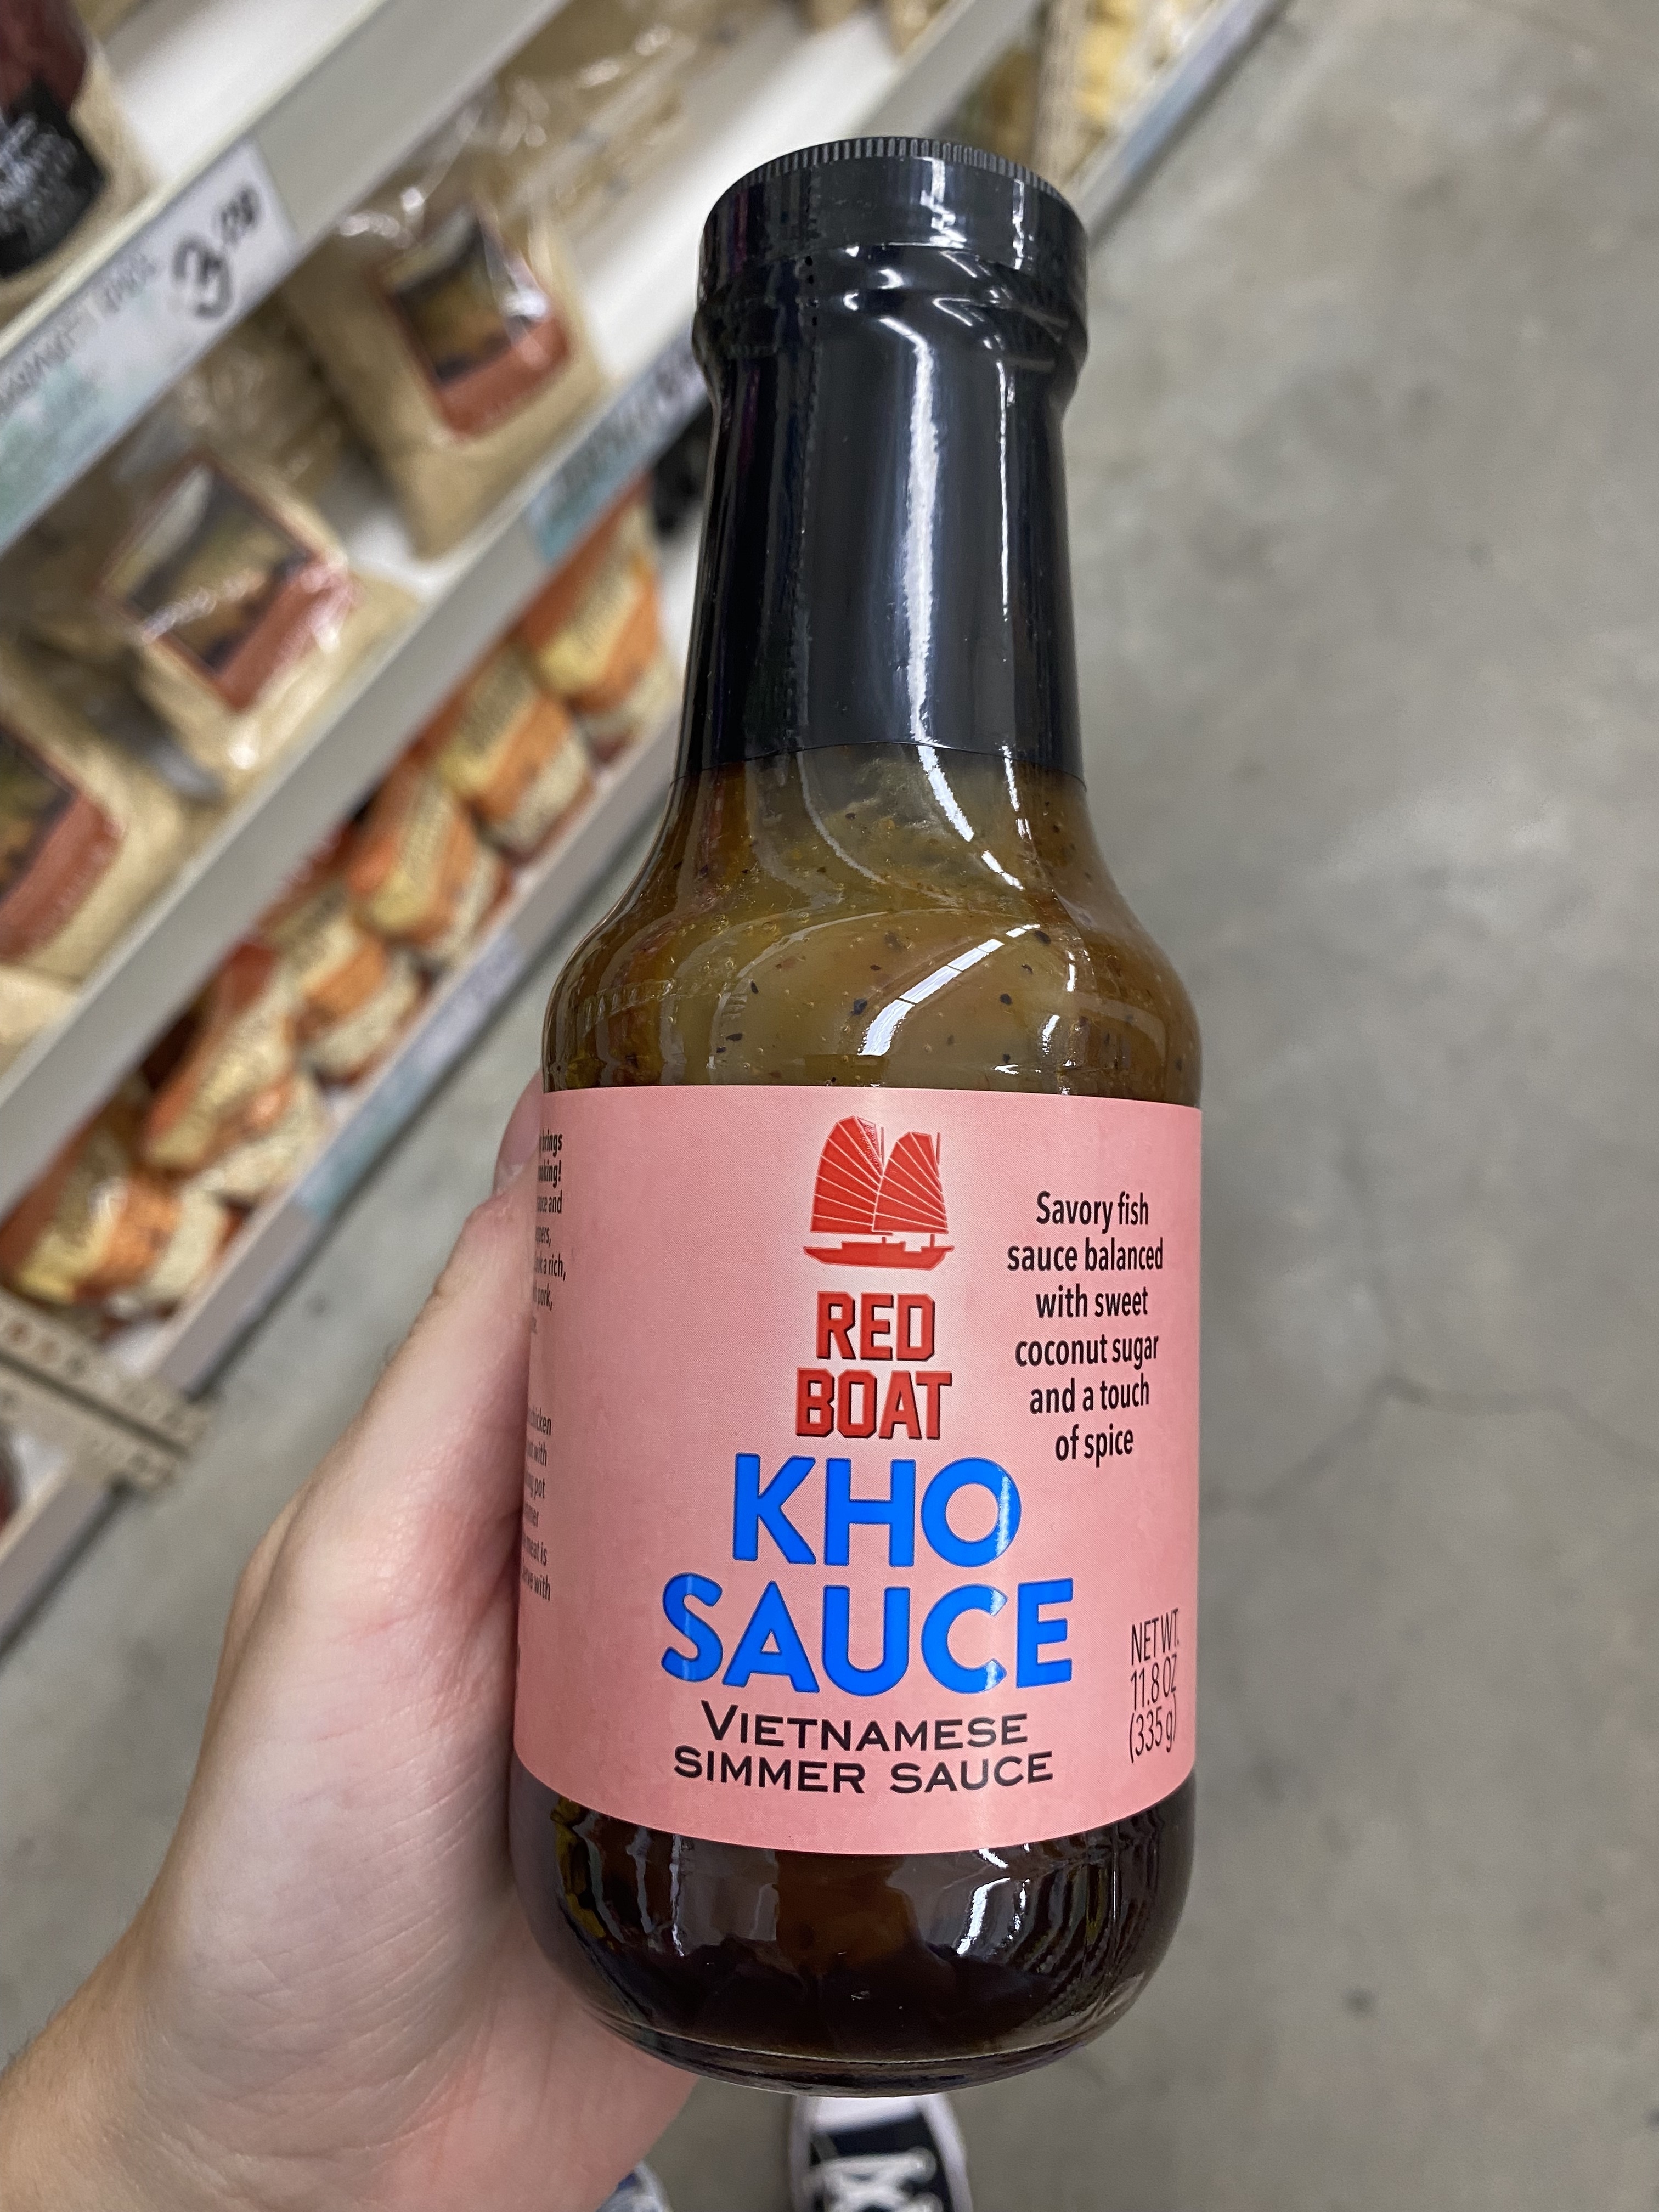 a bottle of red boat kho sauce